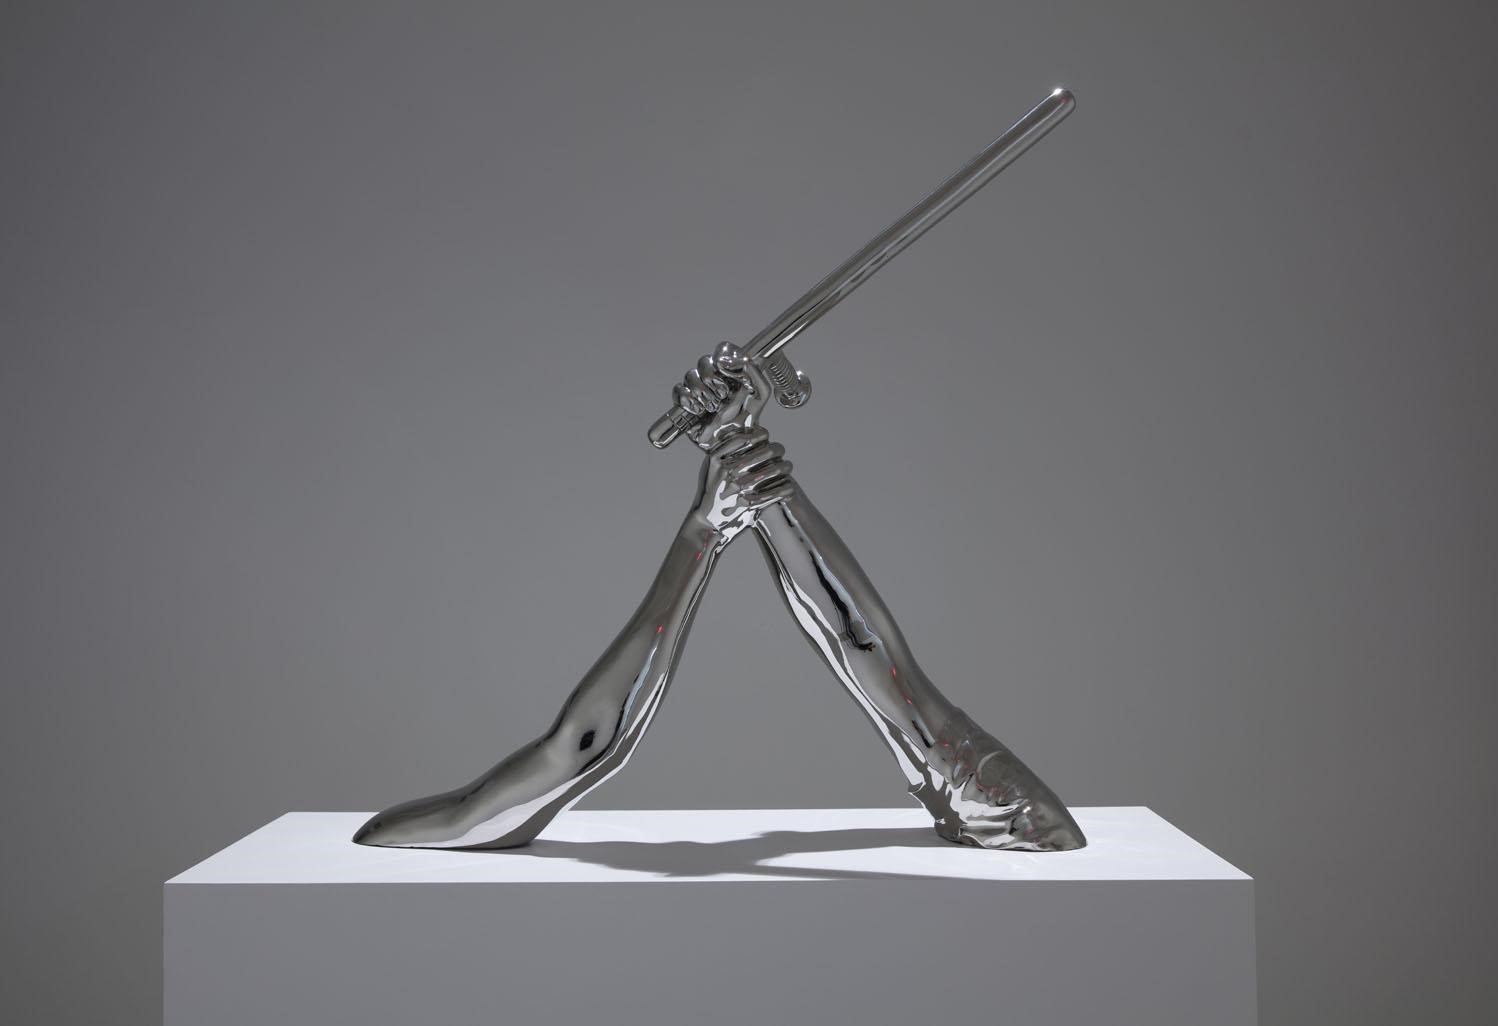 Photo of a metal sculpture by Hank Willis Thomas entitled Strike. It depicts two arms protuding from a white base. One arm is out-stretched and holding a baton-like instrument. The second arm is also reaching out, and has grasped the wrist of the other arm. 